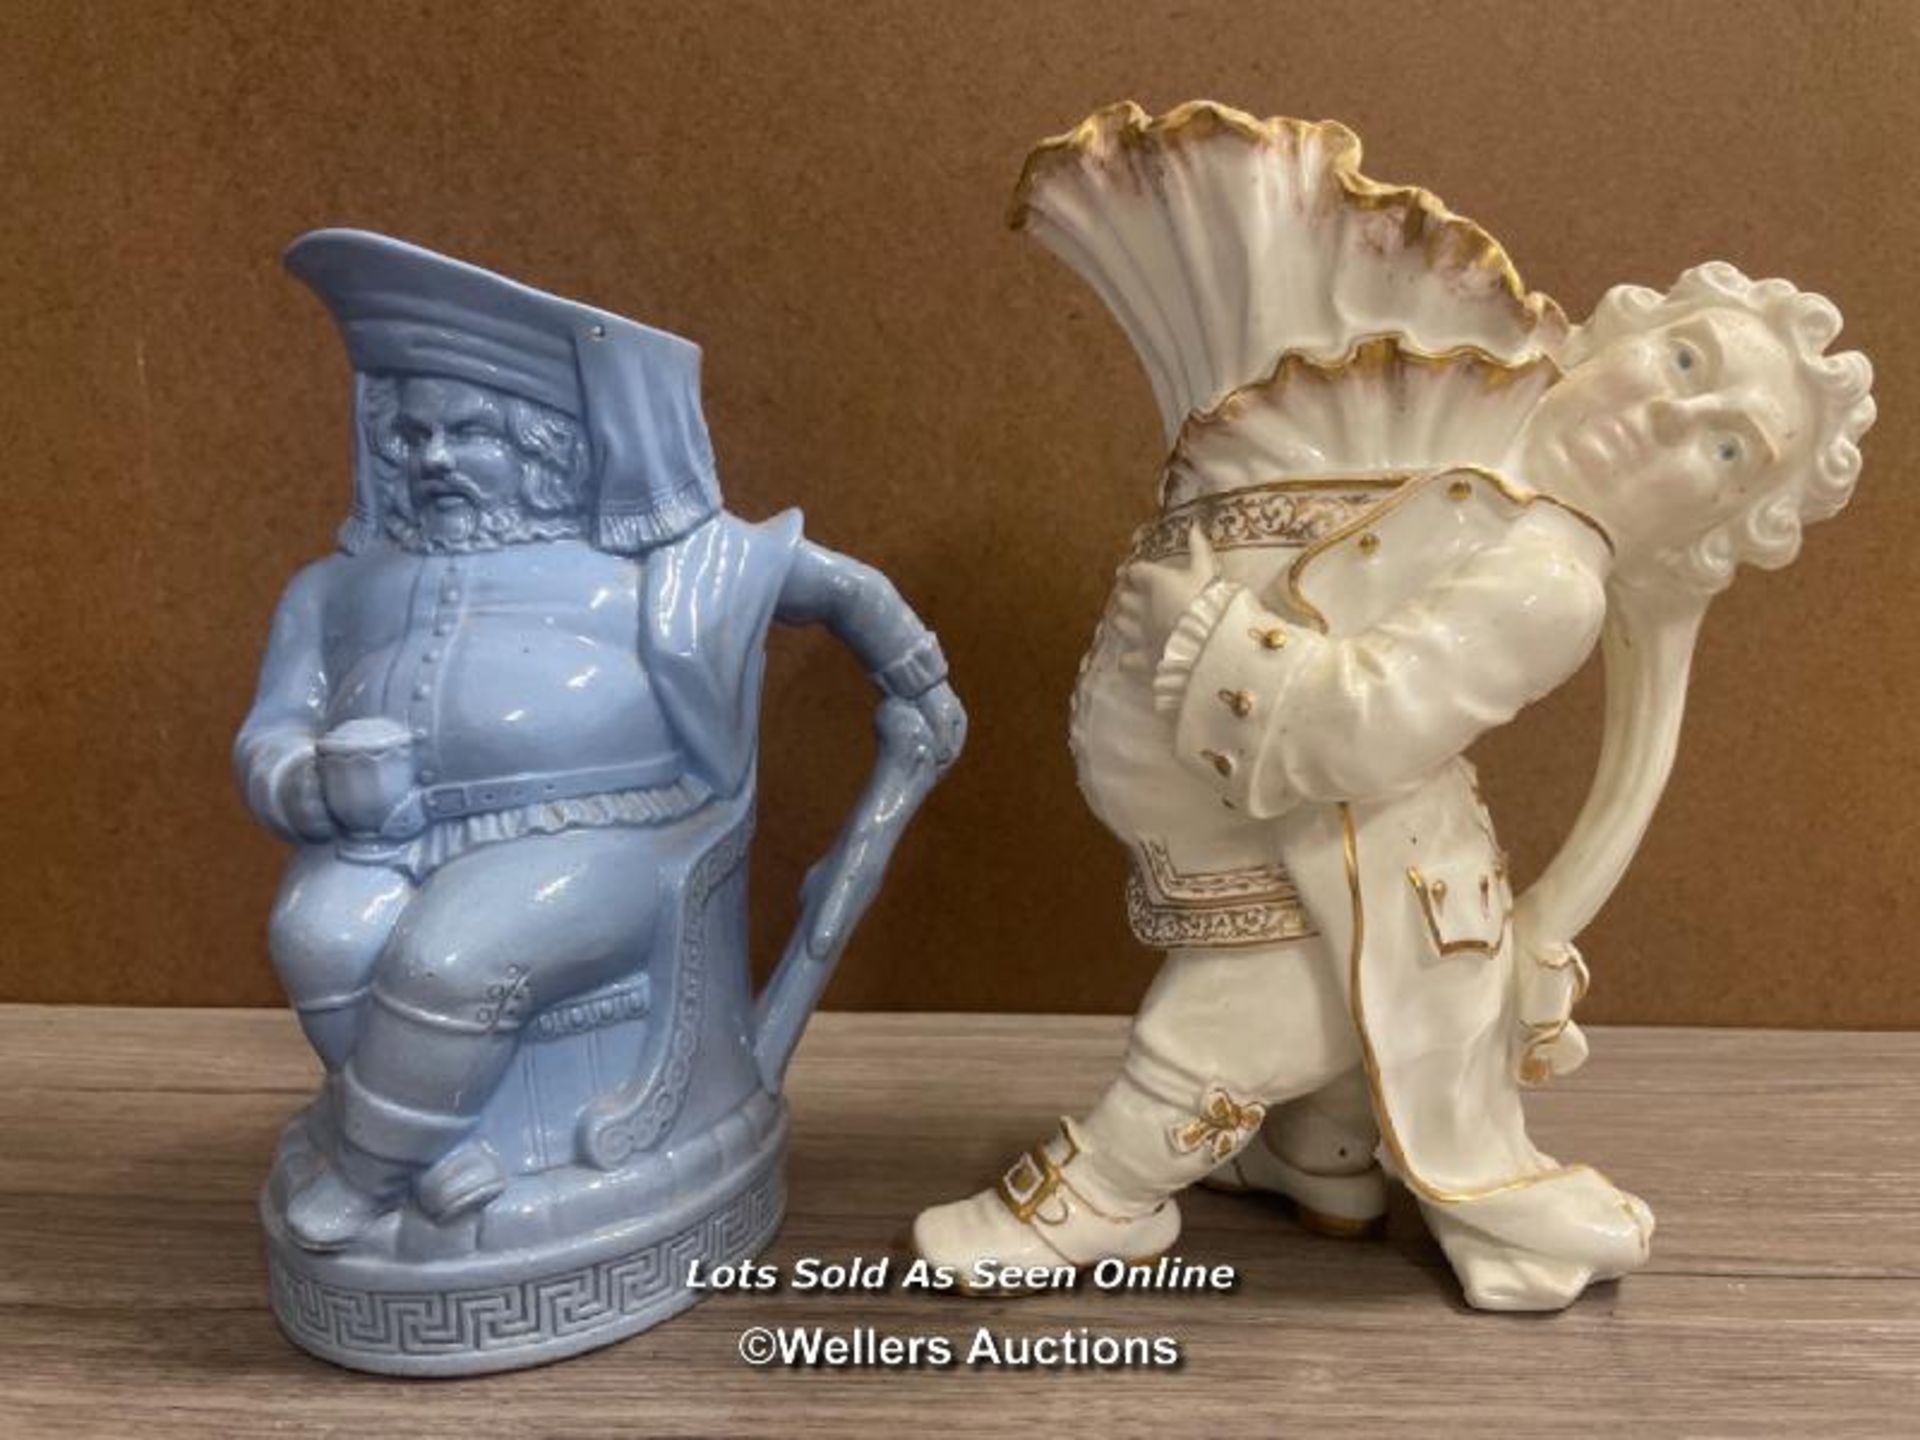 VICTORIAN GILT HEIGHTENED CHARACTER JUG MODELLED AS A PORTLY MAN WITH FRILLED SHIRT; BLUE GLAZE